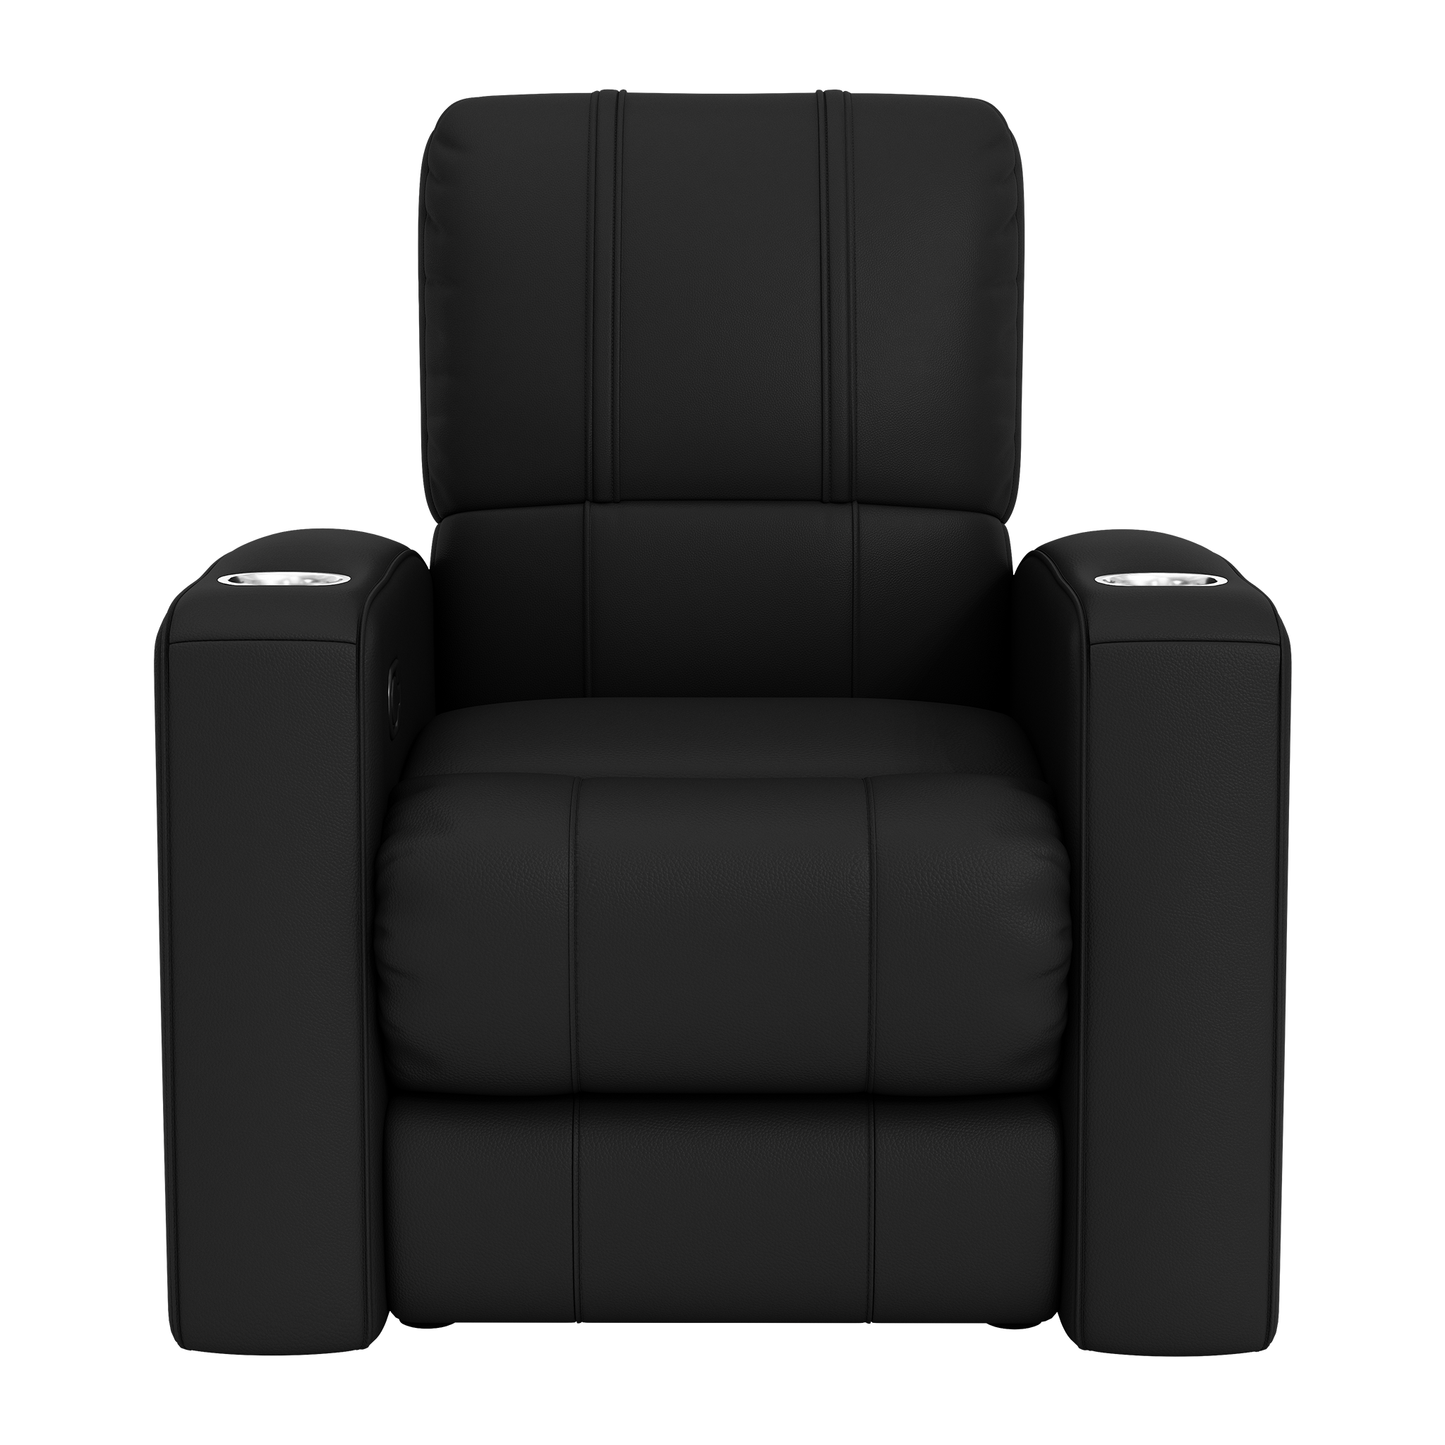 Relax Home Theater Recliner with Memphis Tigers Secondary Logo